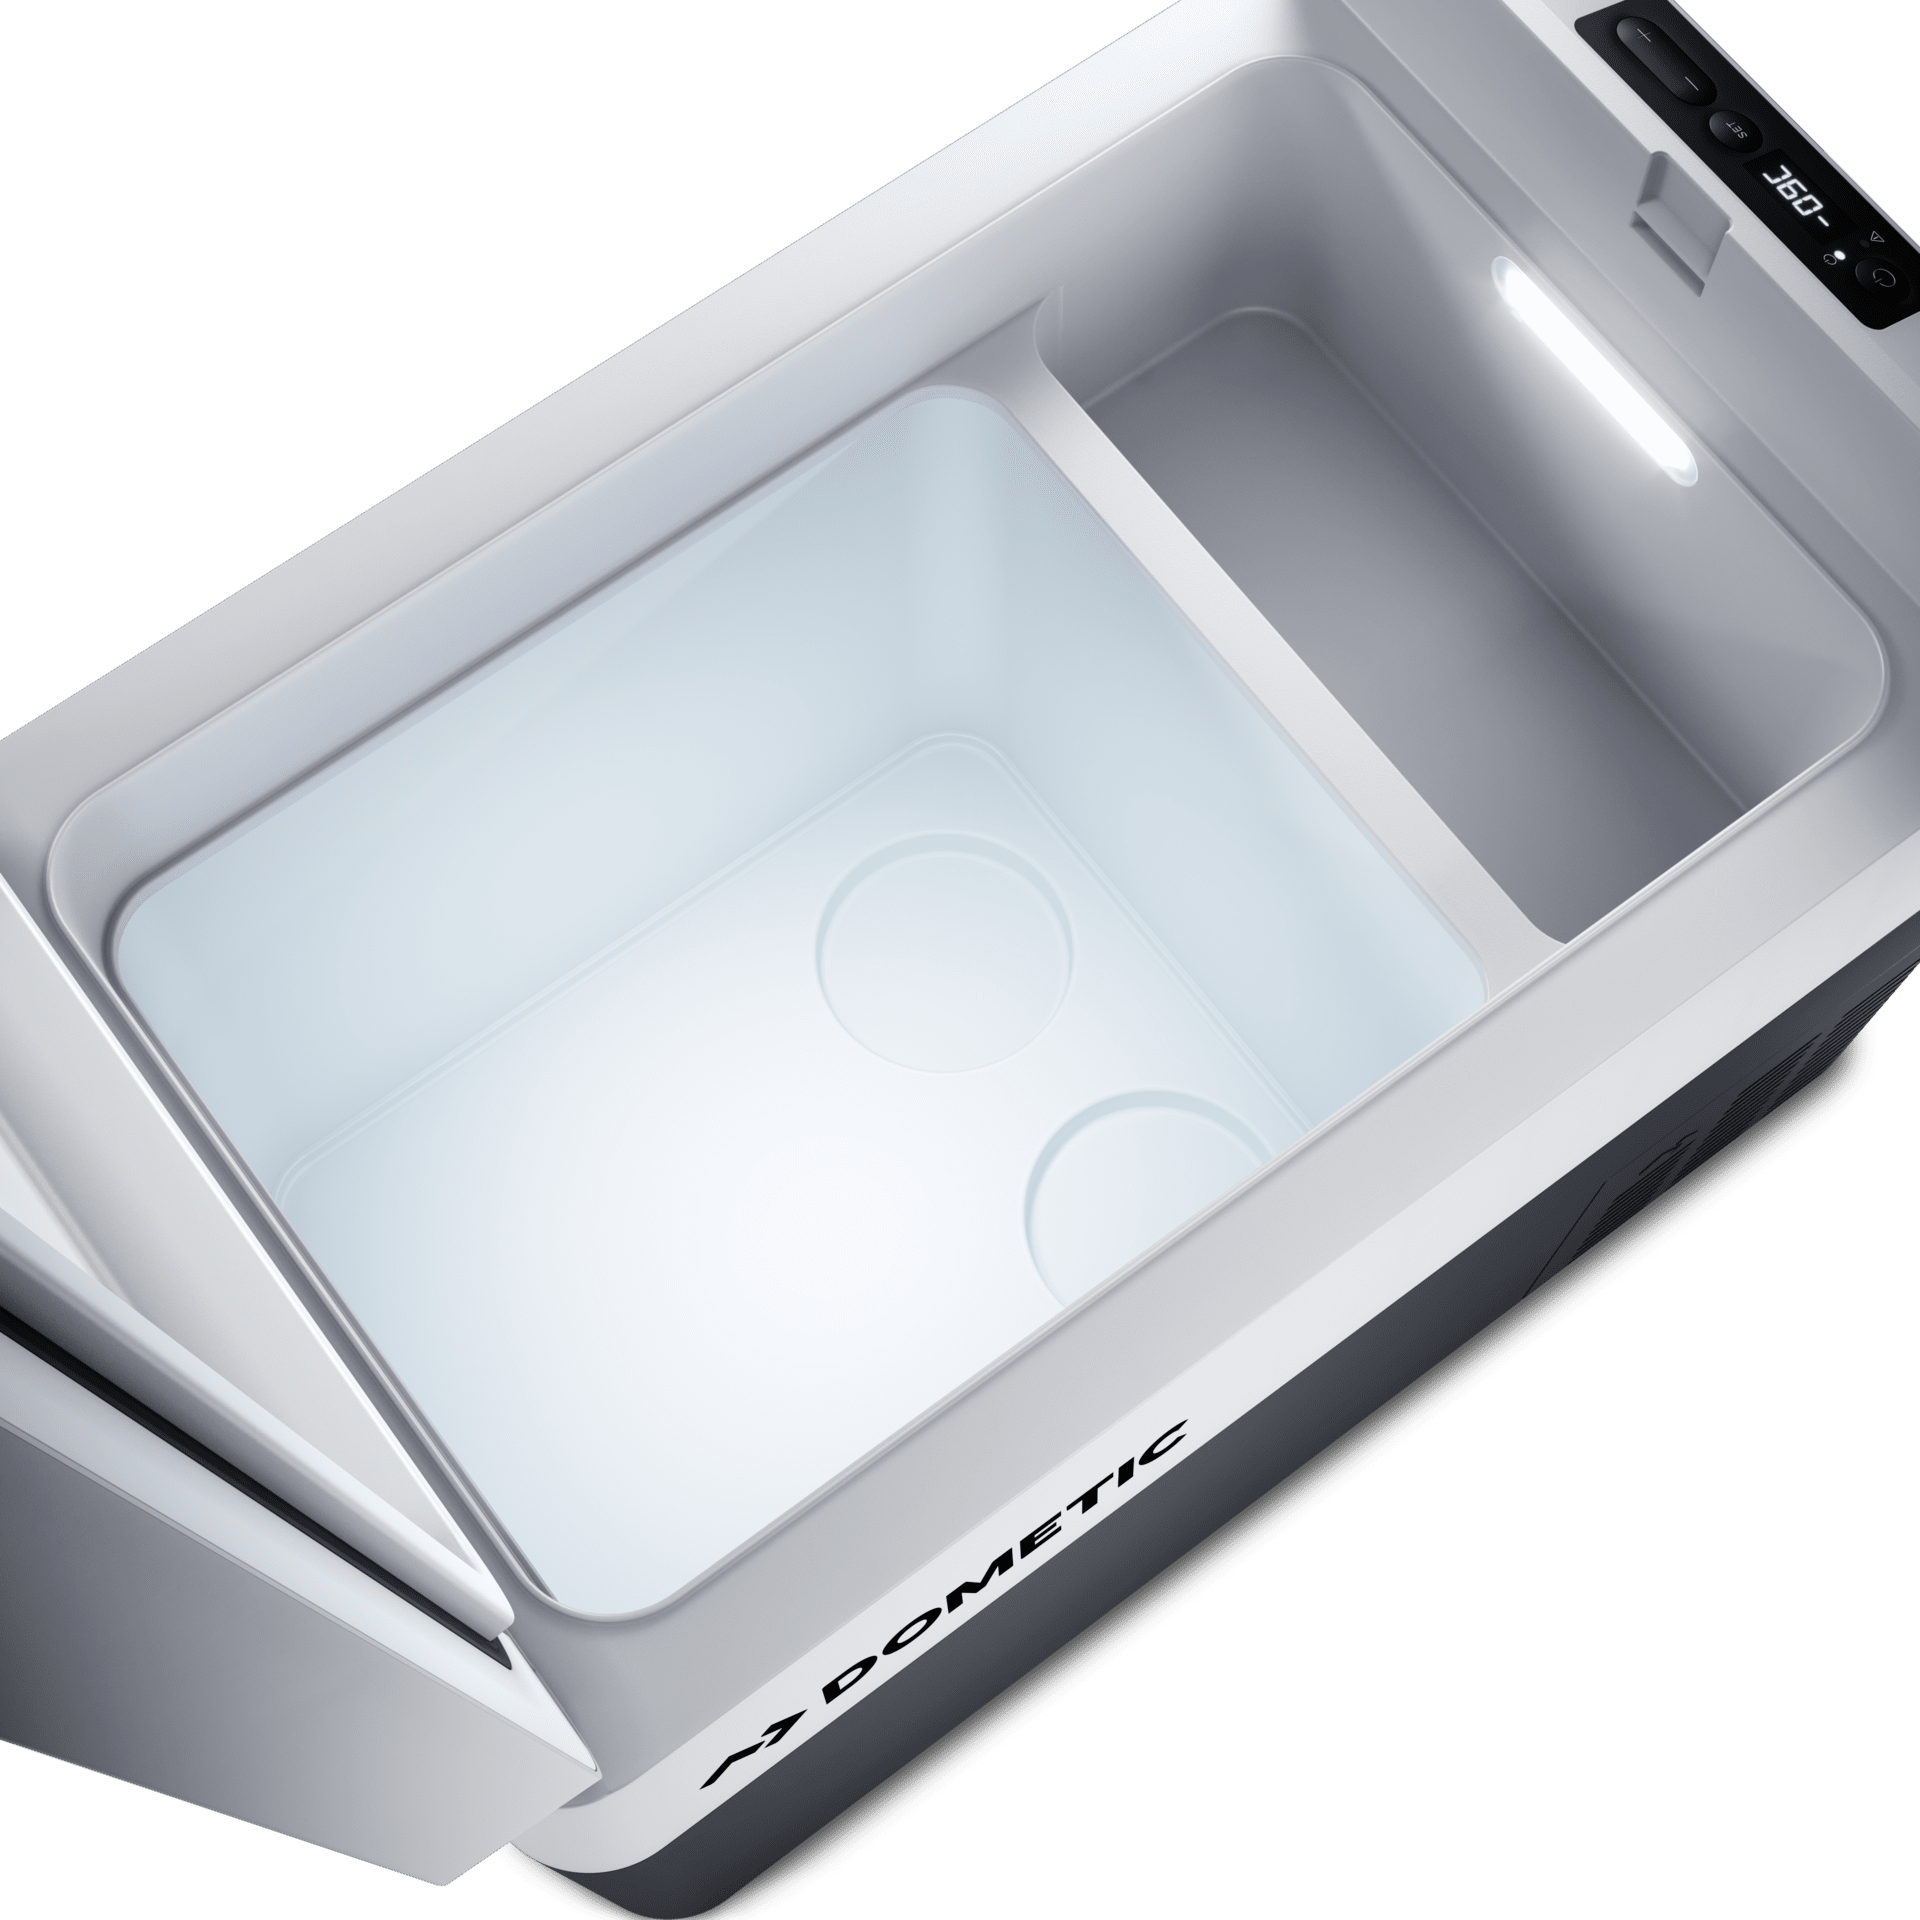 Dometic CoolFreeze CDF2 36 - Mobile compressor cooler and freezer